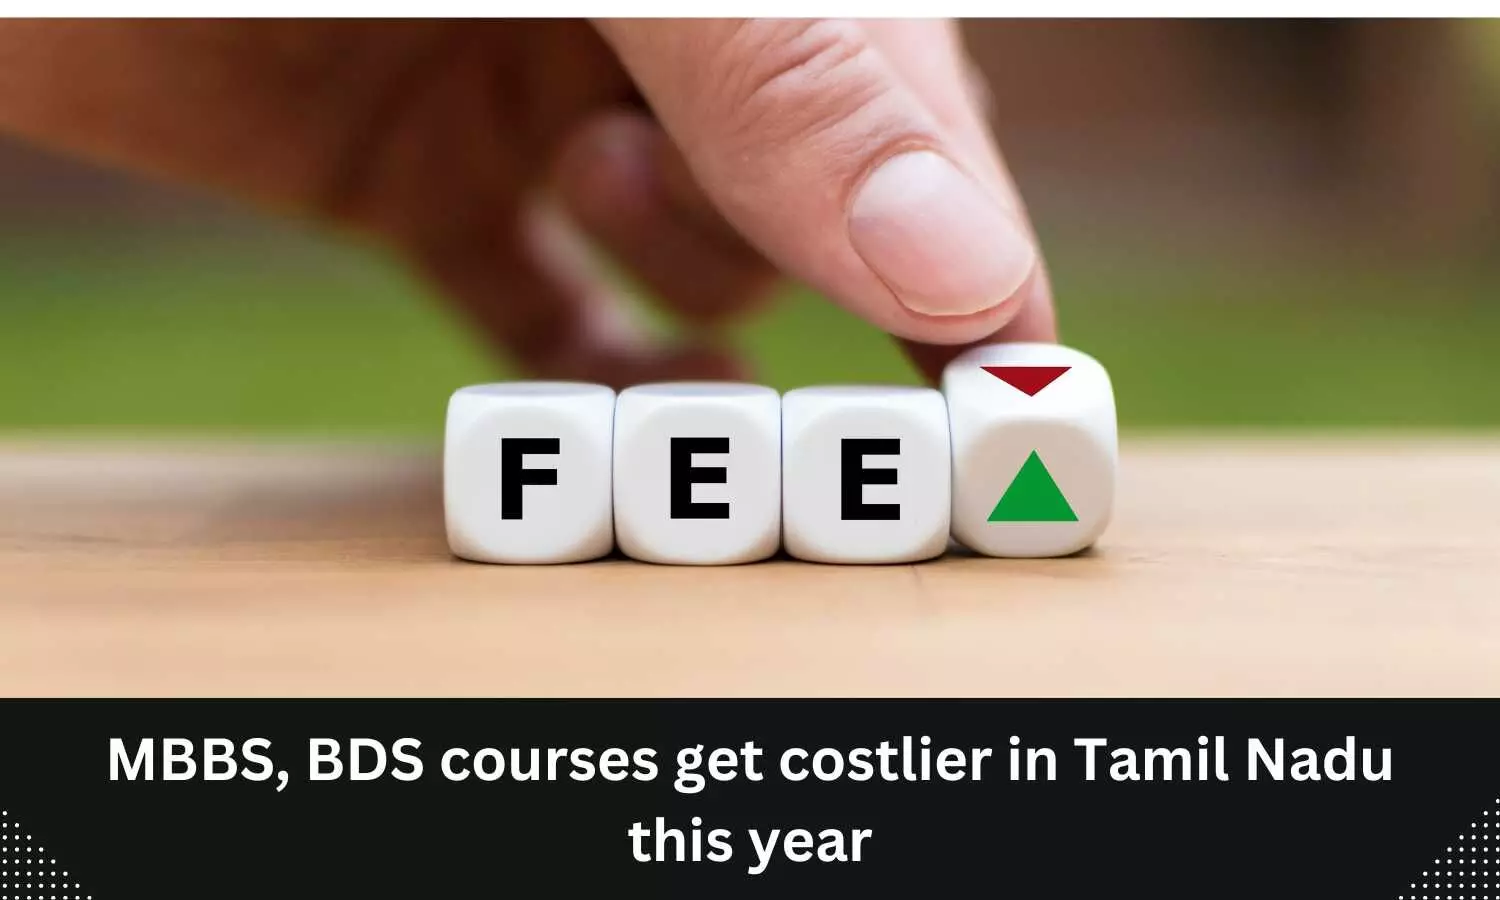 MBBS, BDS students in Tamil Nadu to pay higher fees this year